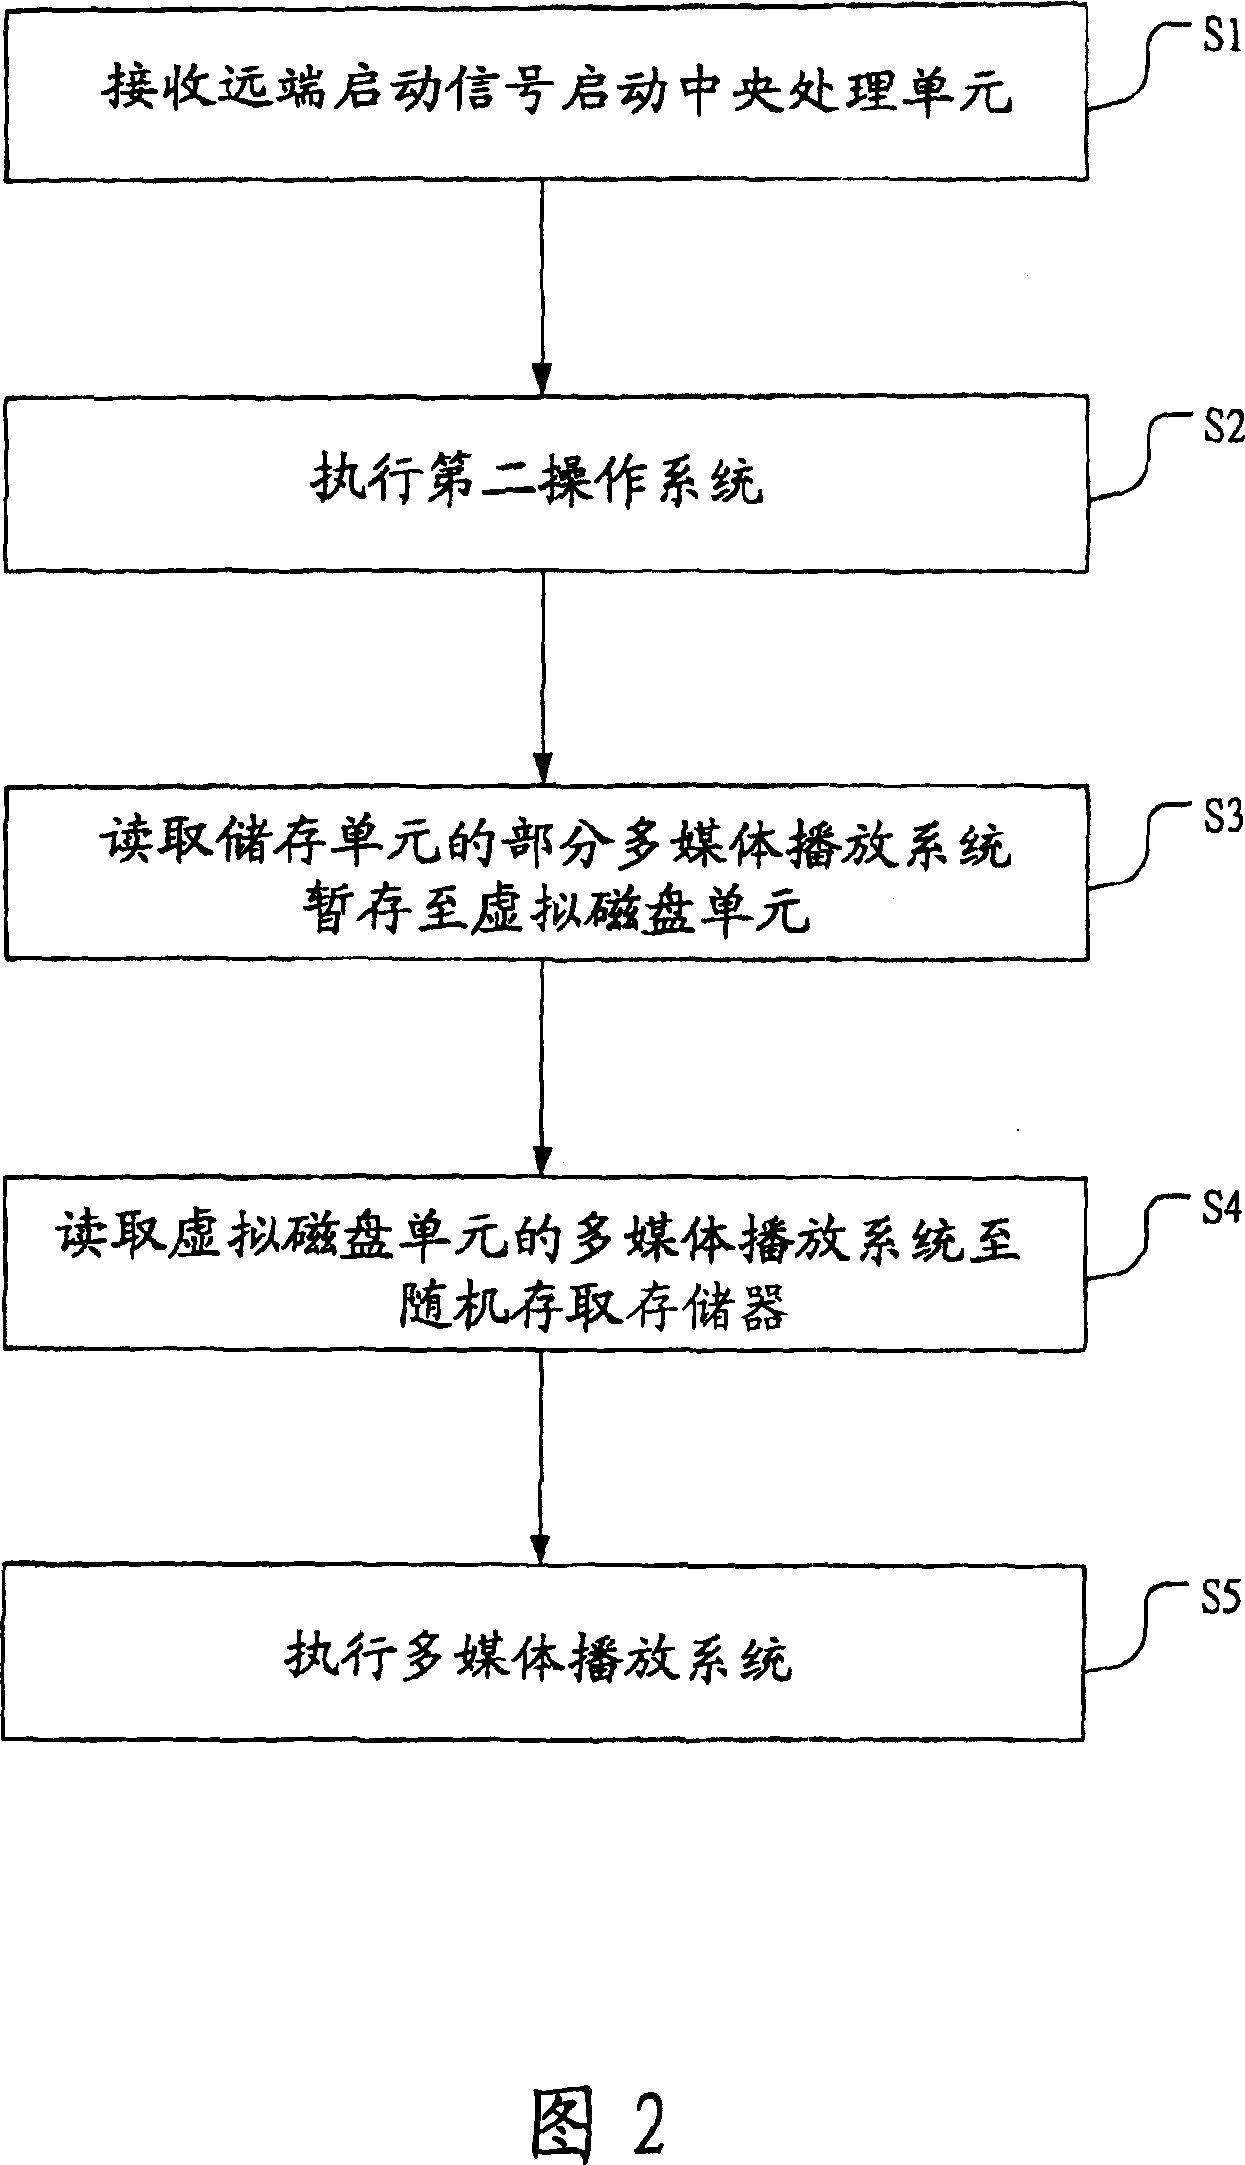 Device and method for controlling noise production of computer system